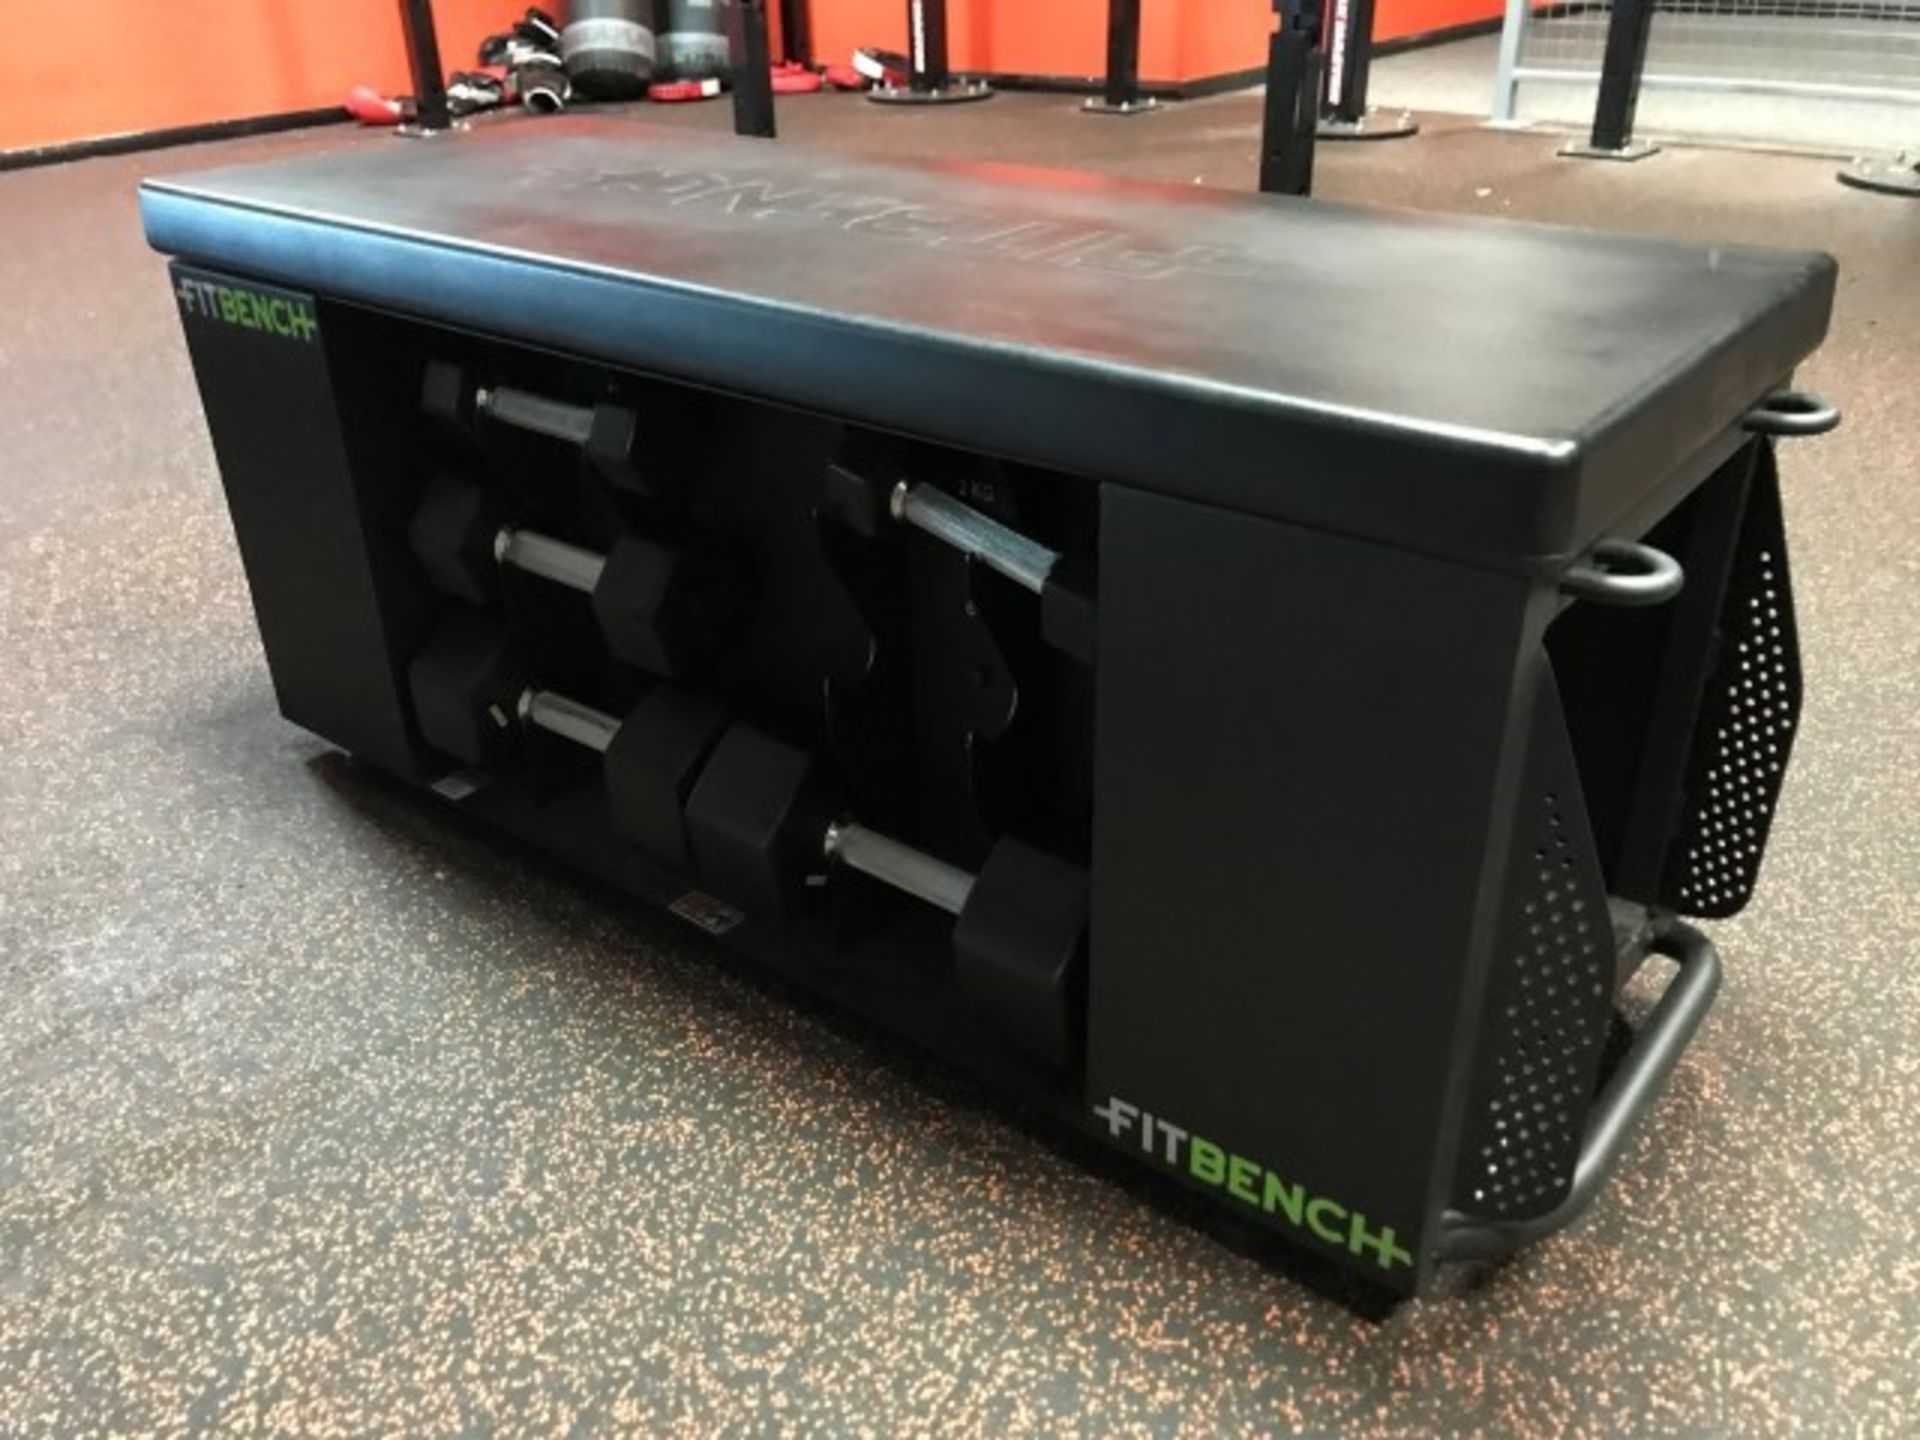 Fitbench mobile bench with free weights